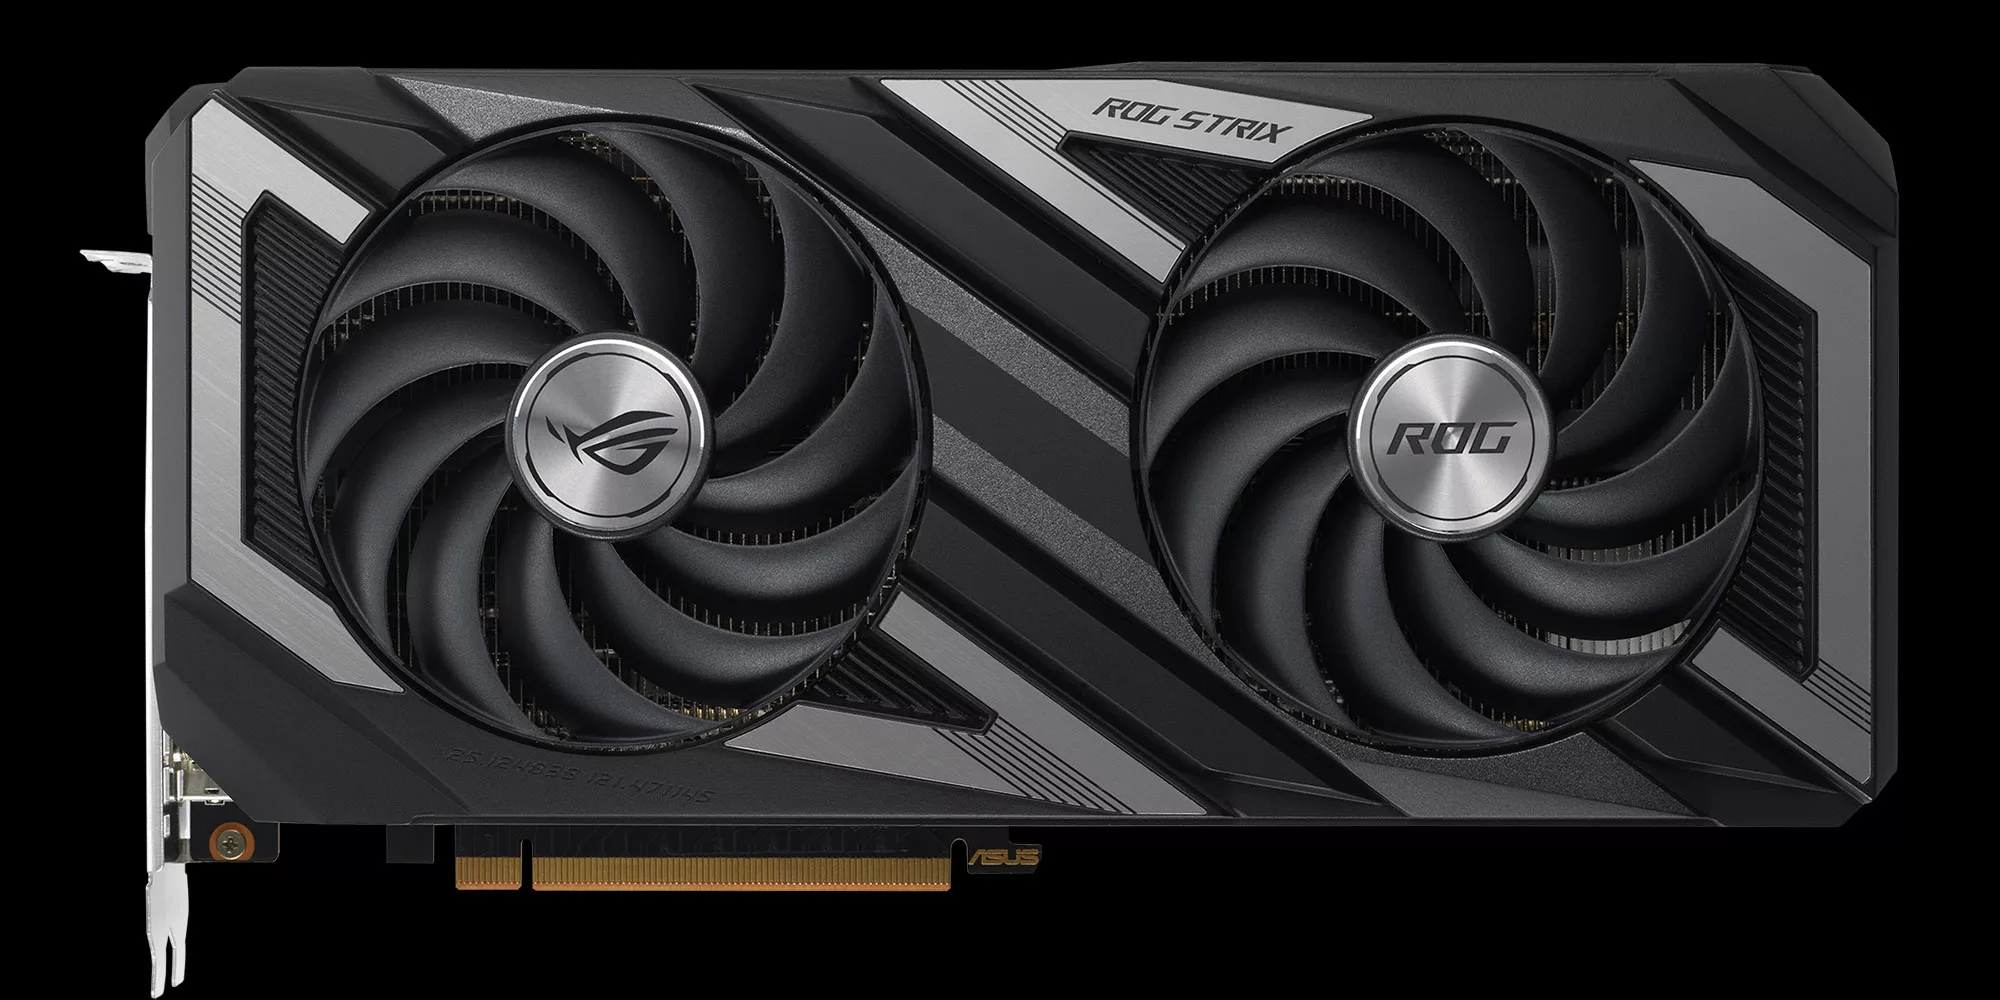 An image of the ROG Strix Radeon RX 6650 XT graphics card on a black background.